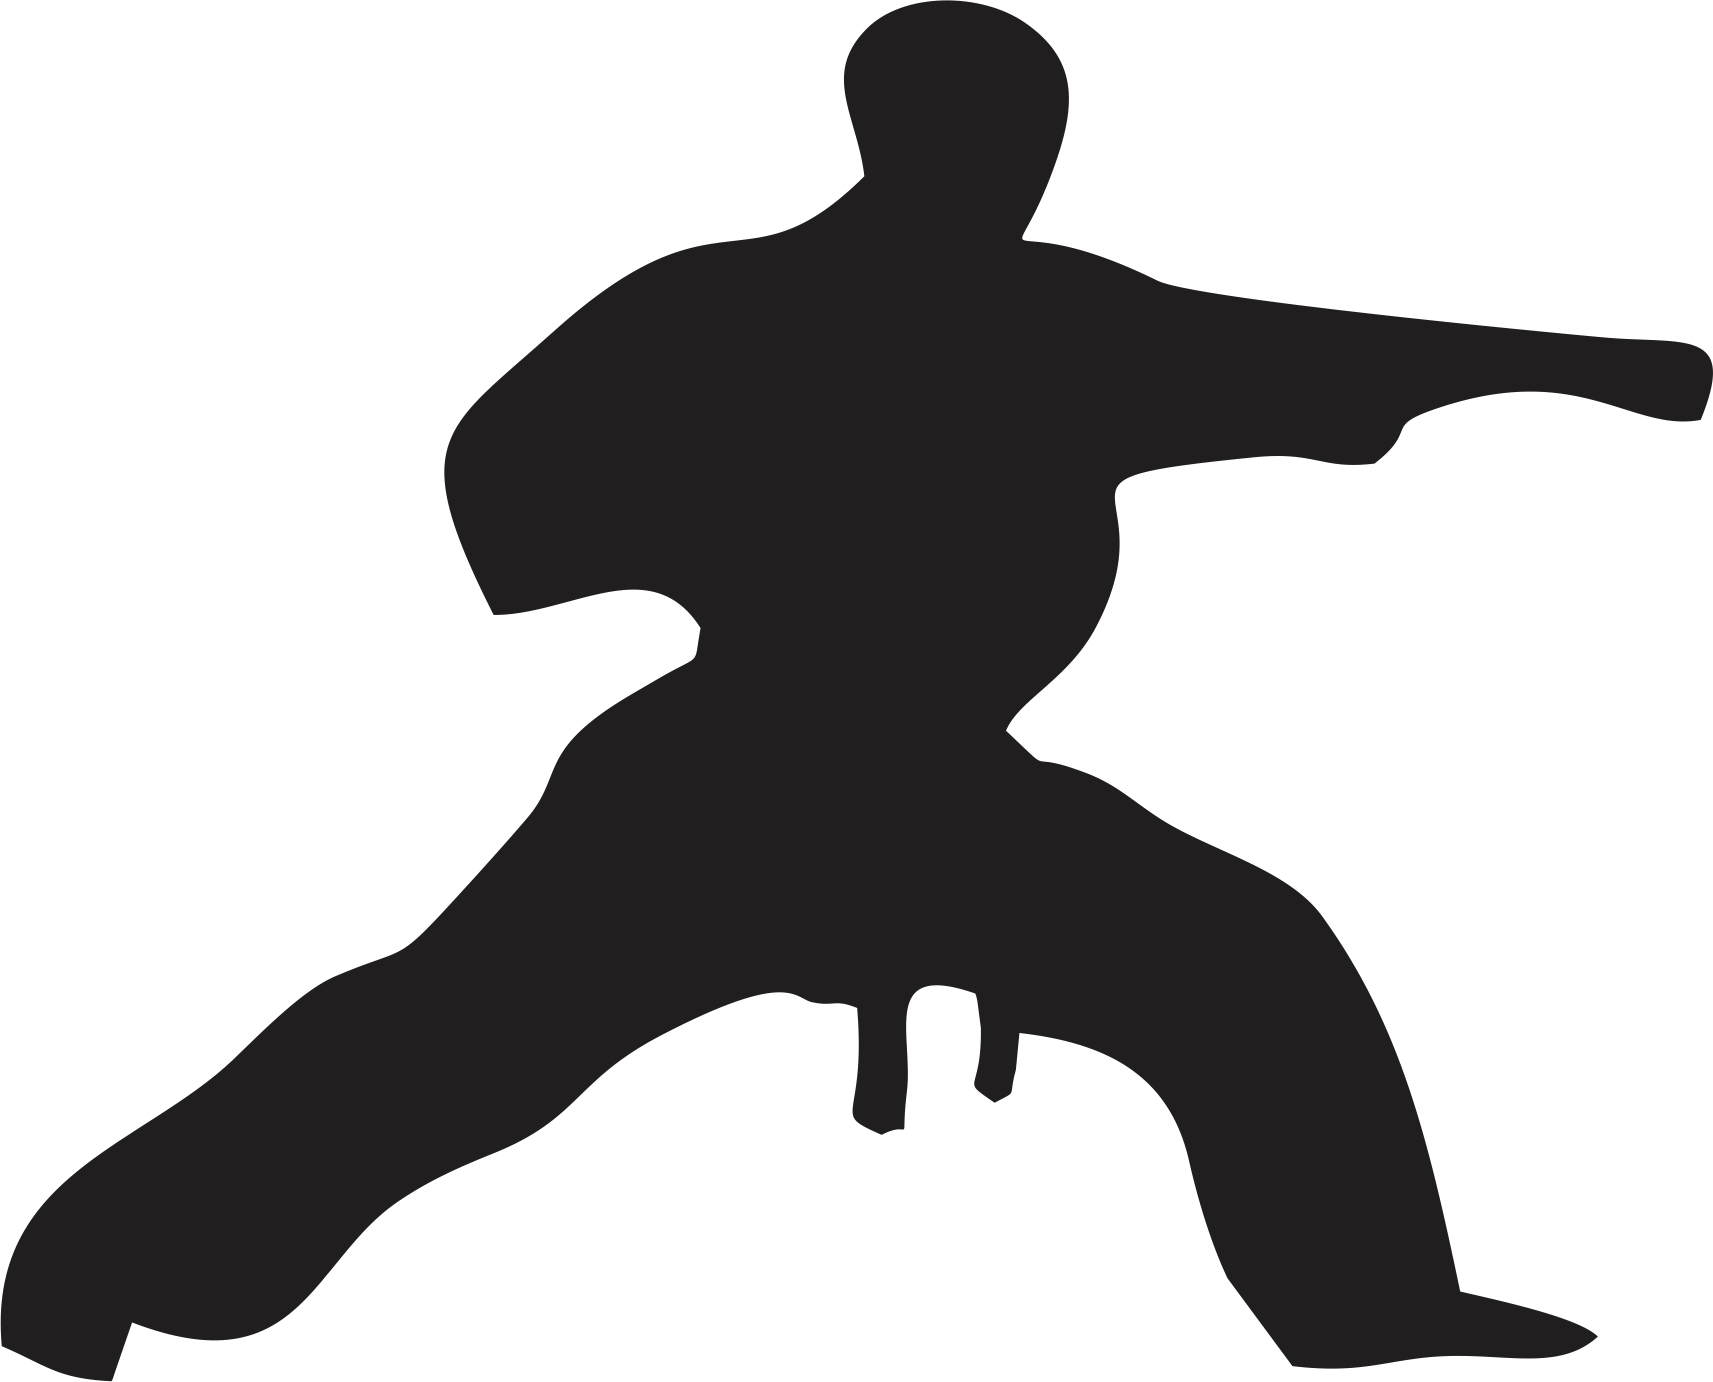 Download Karate clipart silhouette, Karate silhouette Transparent FREE for download on WebStockReview 2021